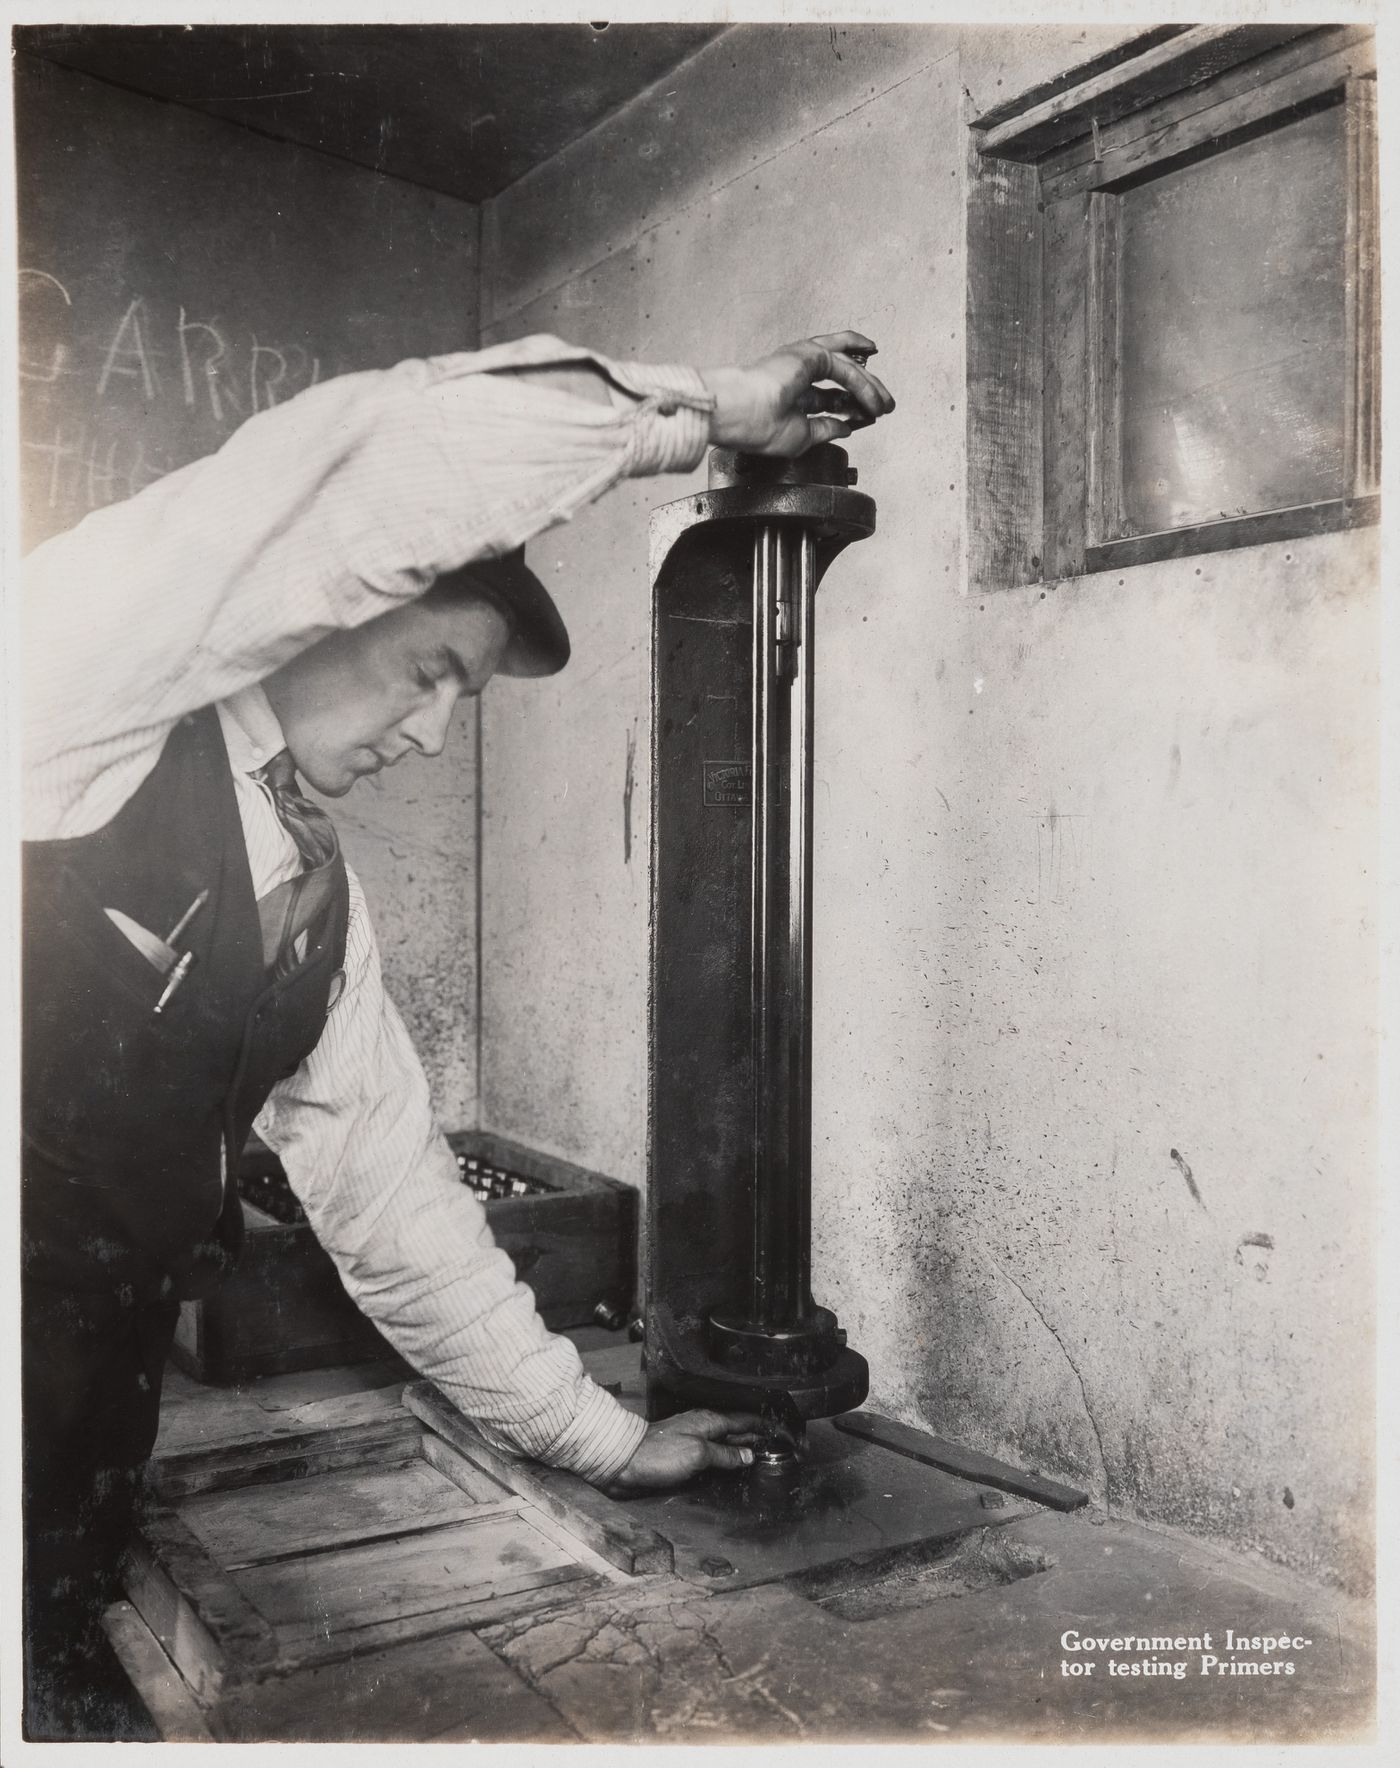 Interior view of inspector testing primers at the Energite Explosives Plant No. 3, the Shell Loading Plant, Renfrew, Ontario, Canada